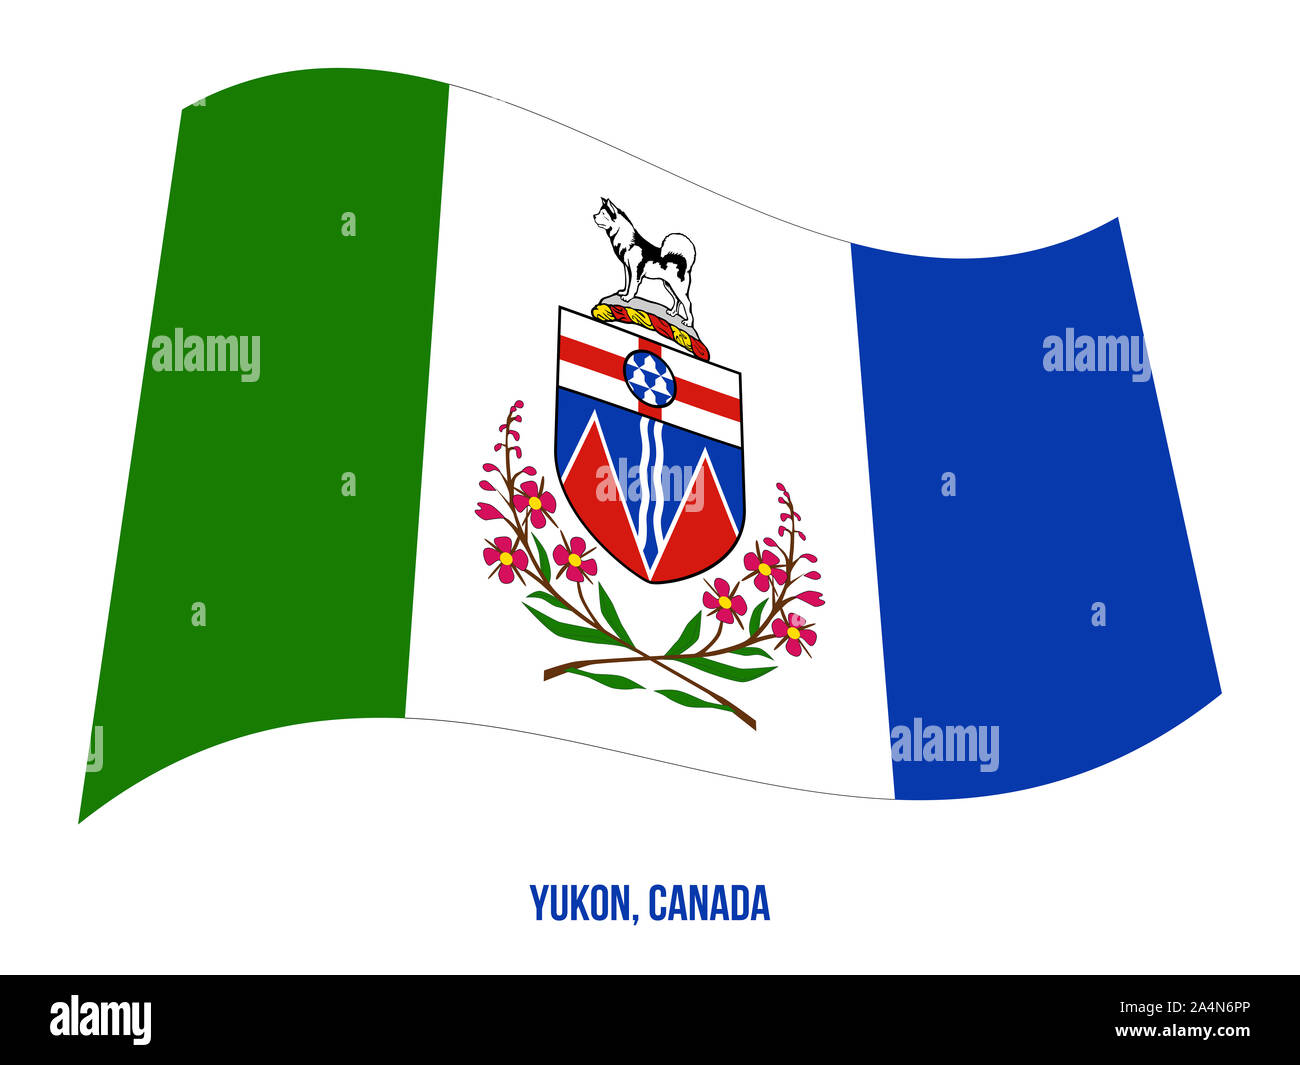 Yukon Flag Waving Vector Illustration on White Background. Territory Flag of Canada. Correct Size, Proportion and Colors. Stock Photo